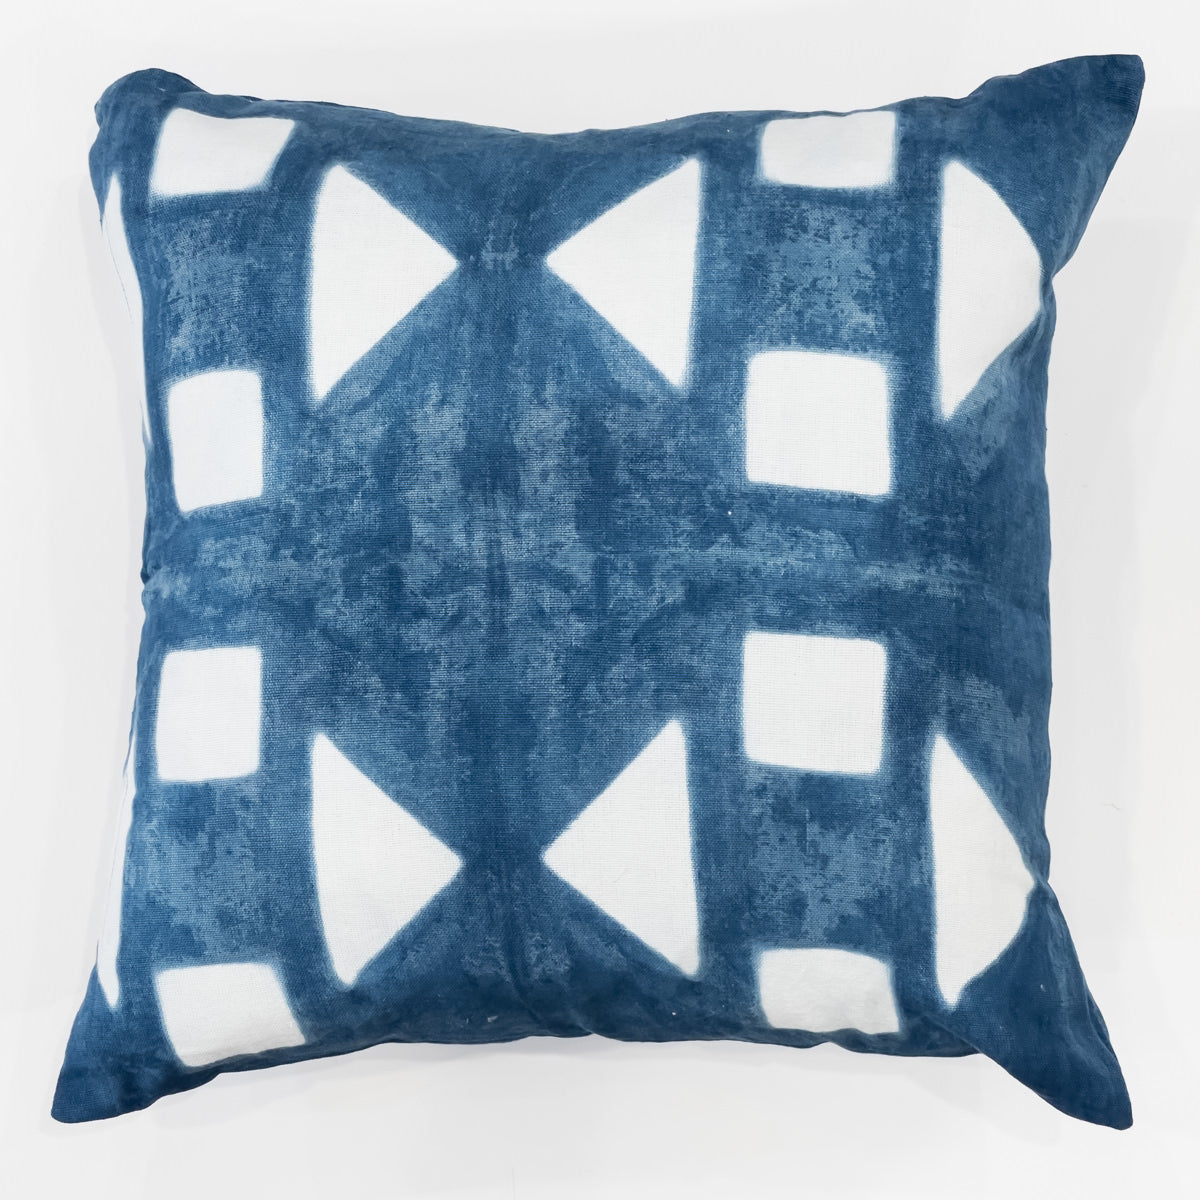 Cushion Cover - Blue with White Shapes